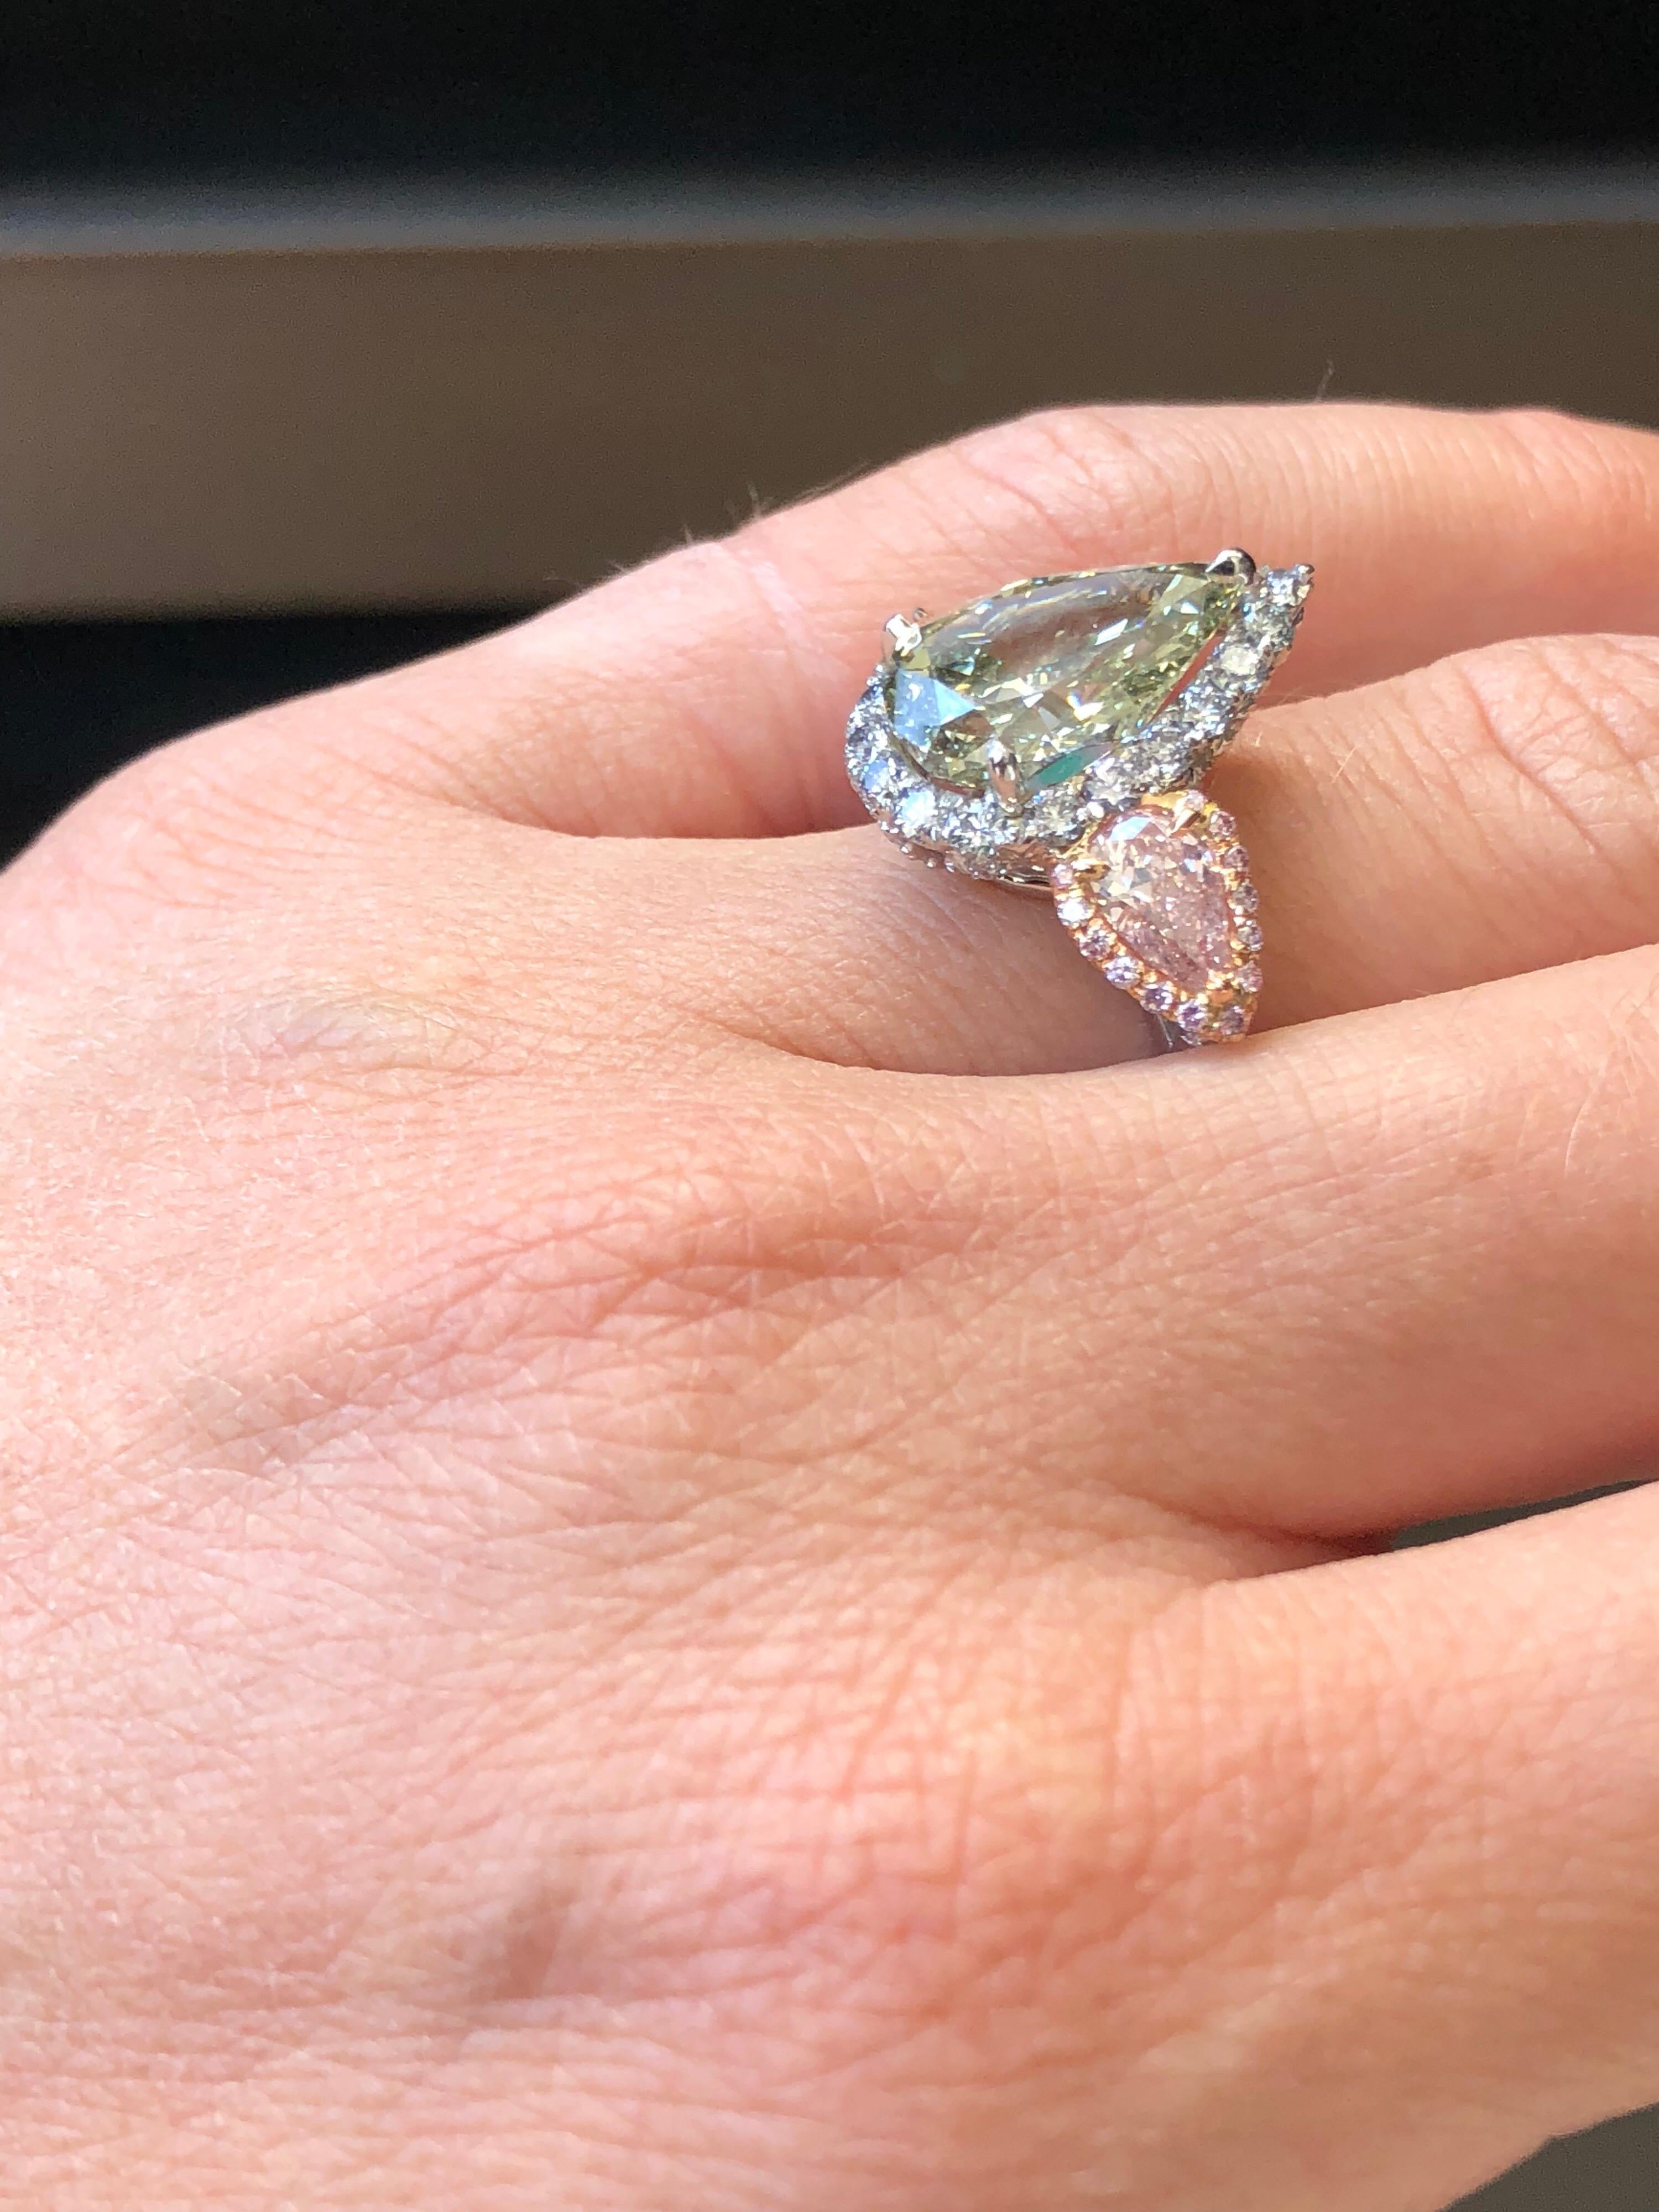 Green Diamond Ring 5.16 Carat Pear Shape GIA Certified In New Condition For Sale In Beverly Hills, CA